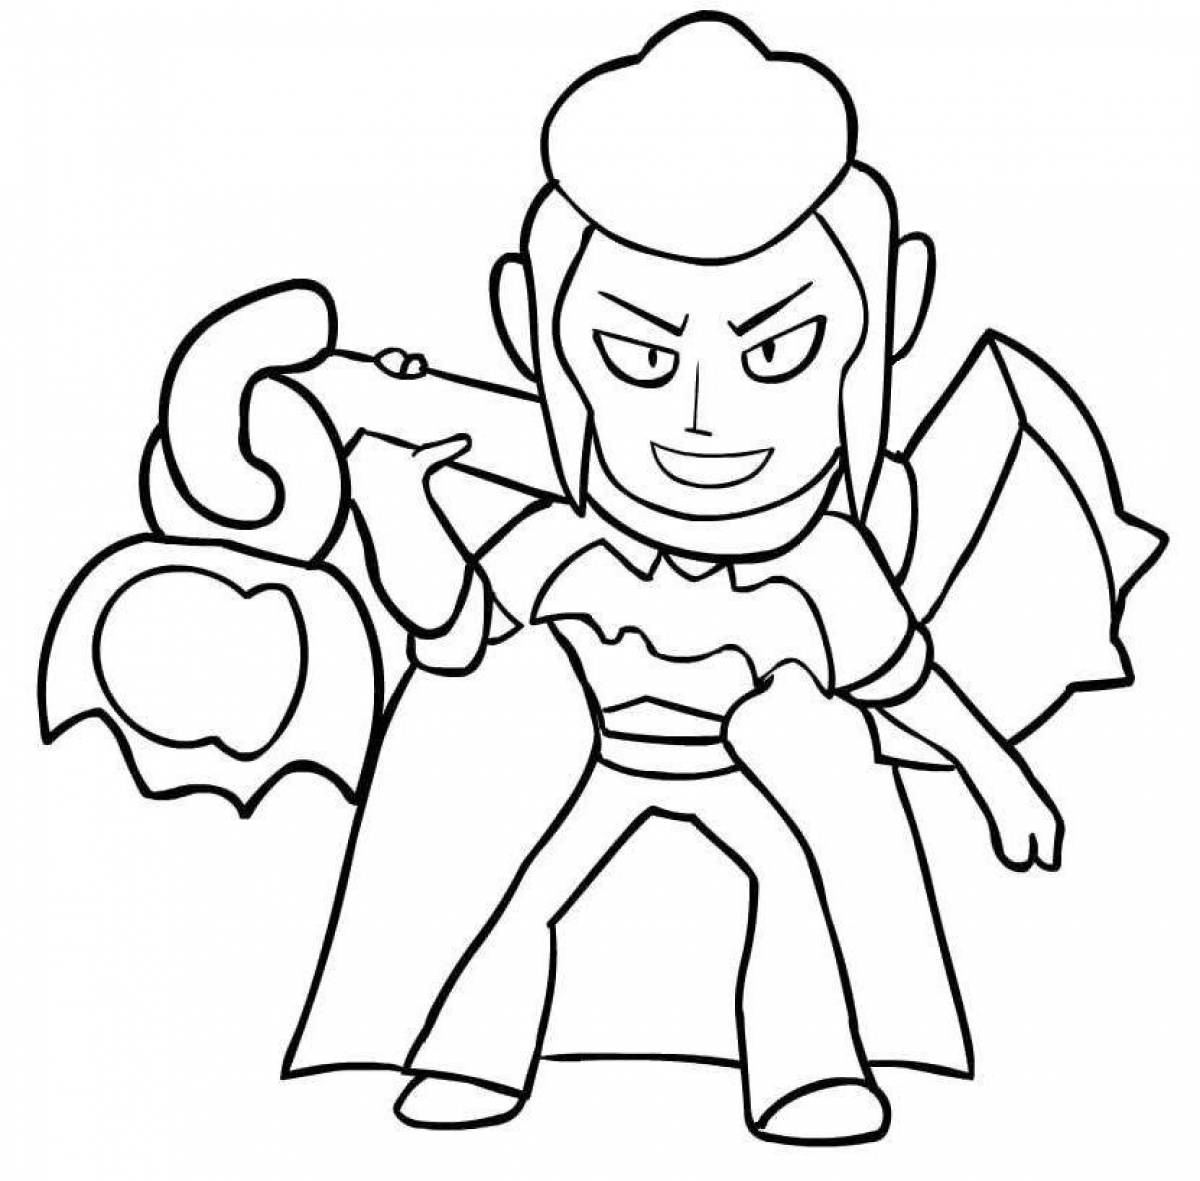 Bravo stars glitter coloring pages